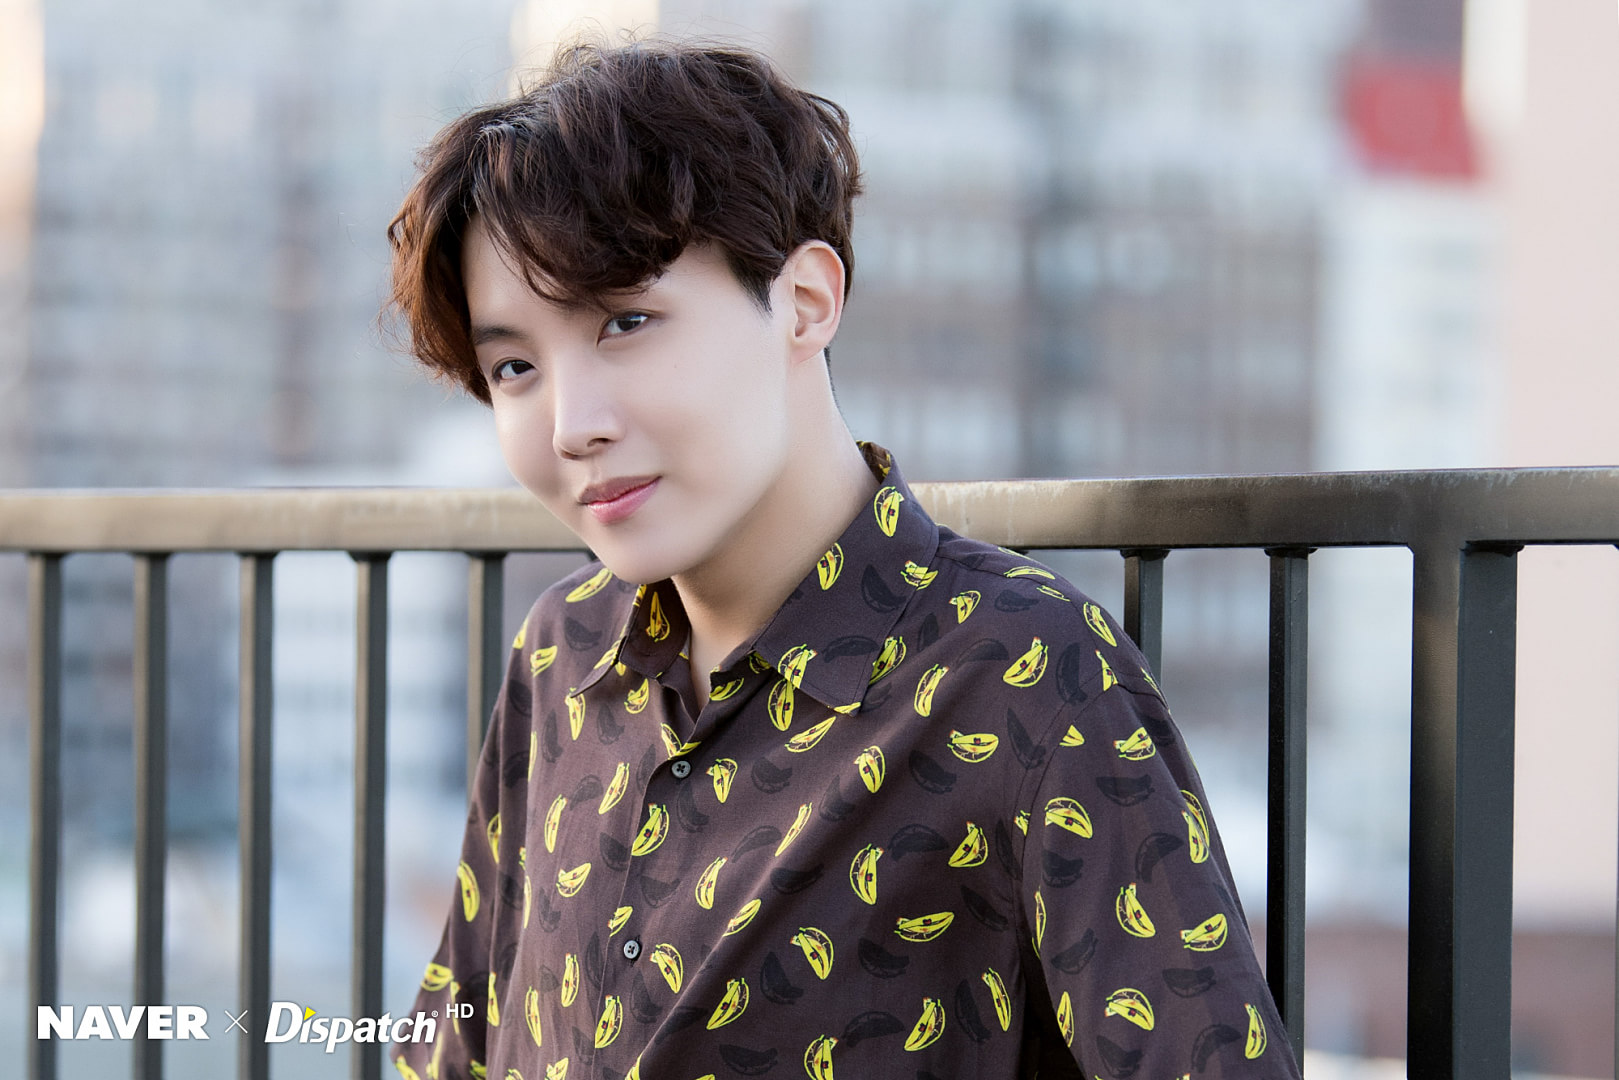 J Hope BTS images J Hope x Dispatch HD wallpaper and background